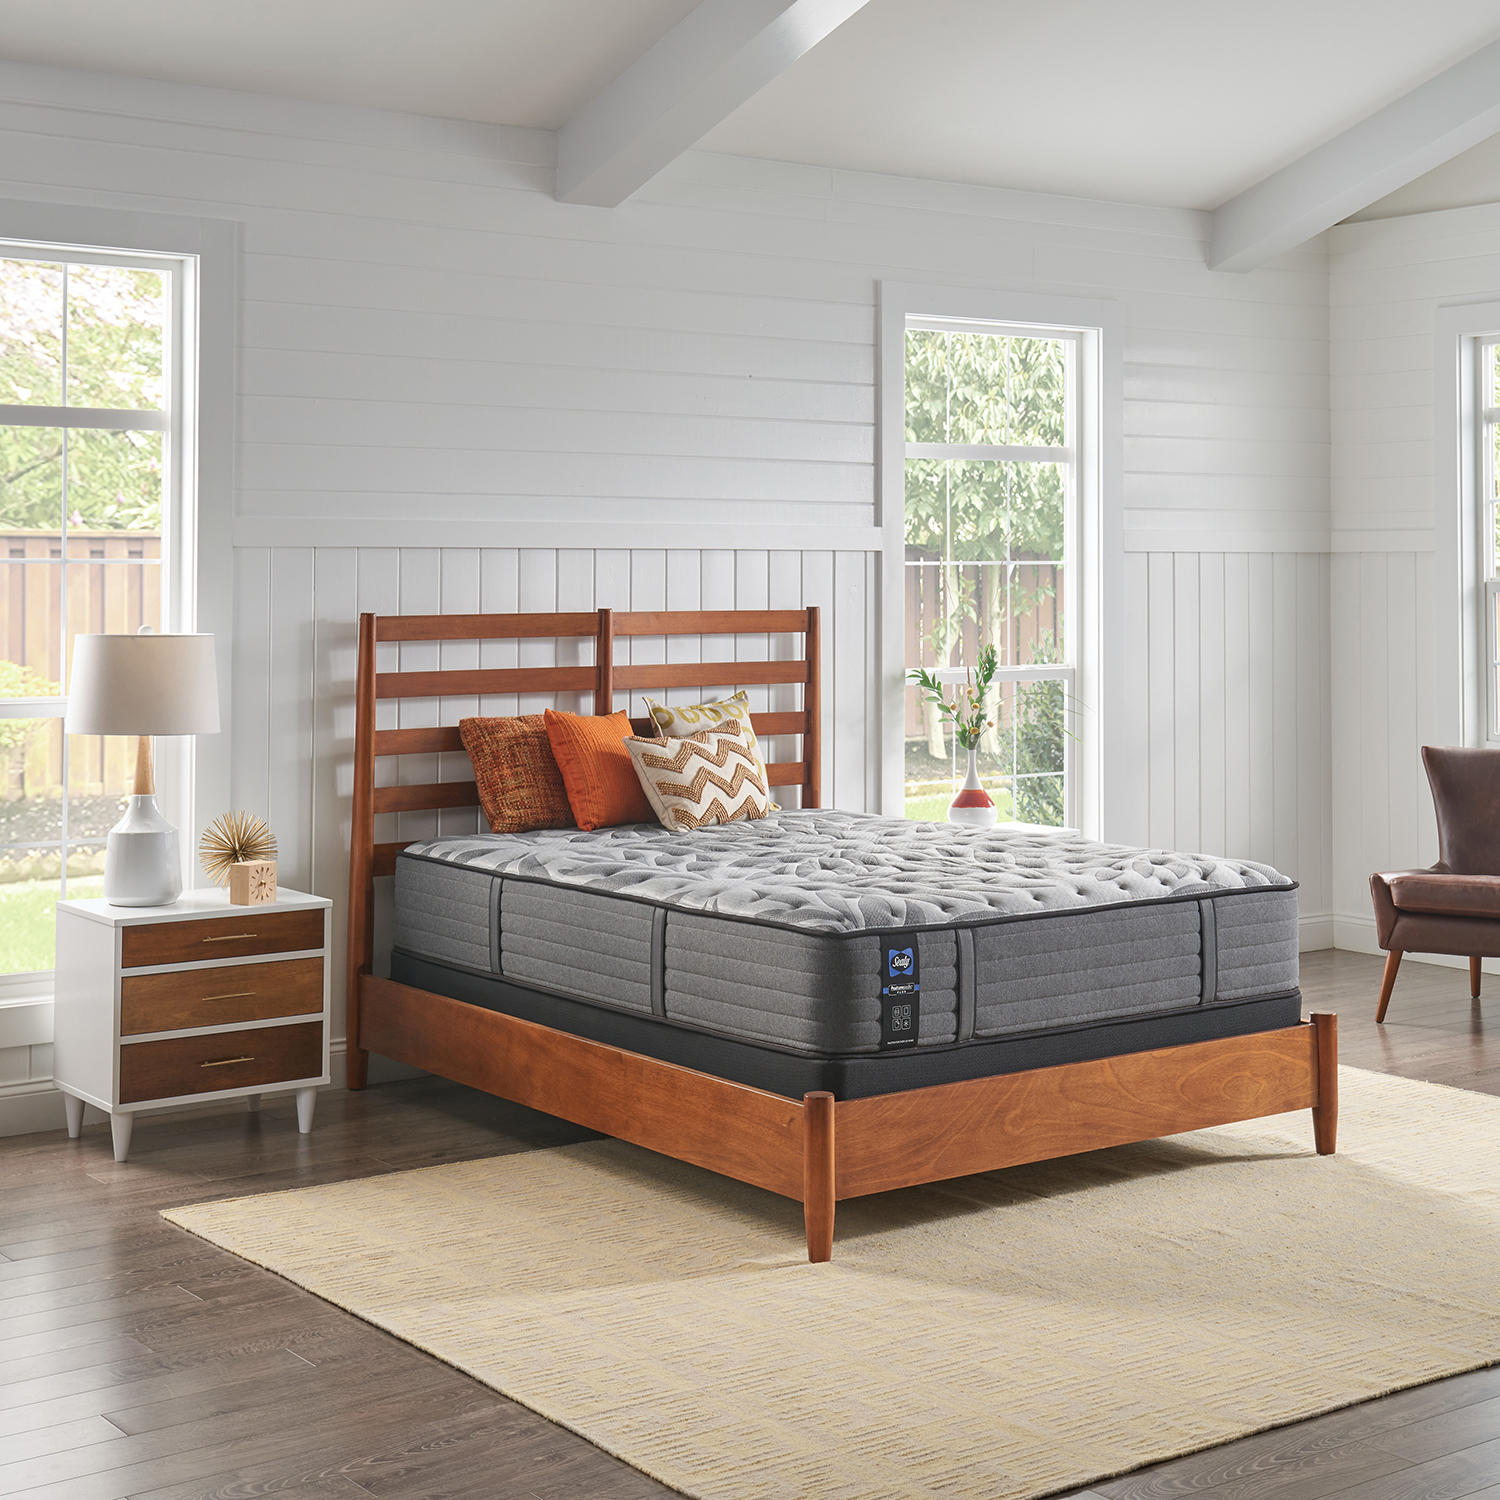 Sealy Posturepedic Plus Spring Anderson Tight Top Ultra Firm Feel Mattress and 9' Foundation California King